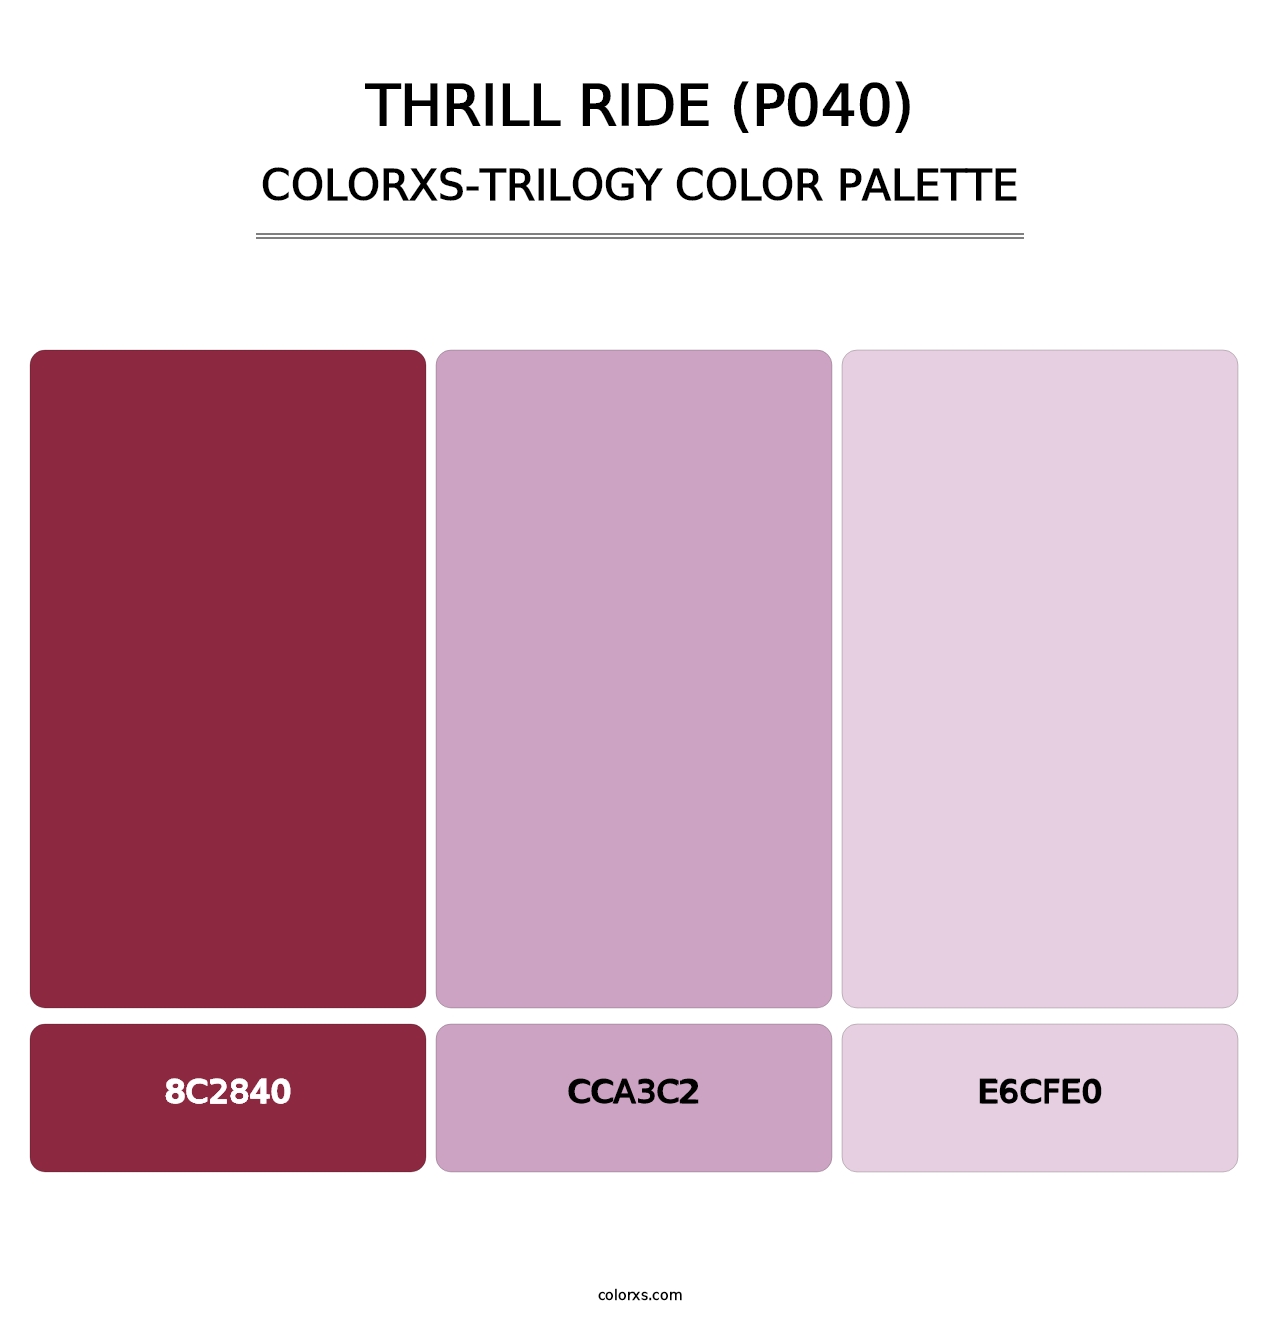 Thrill Ride (P040) - Colorxs Trilogy Palette